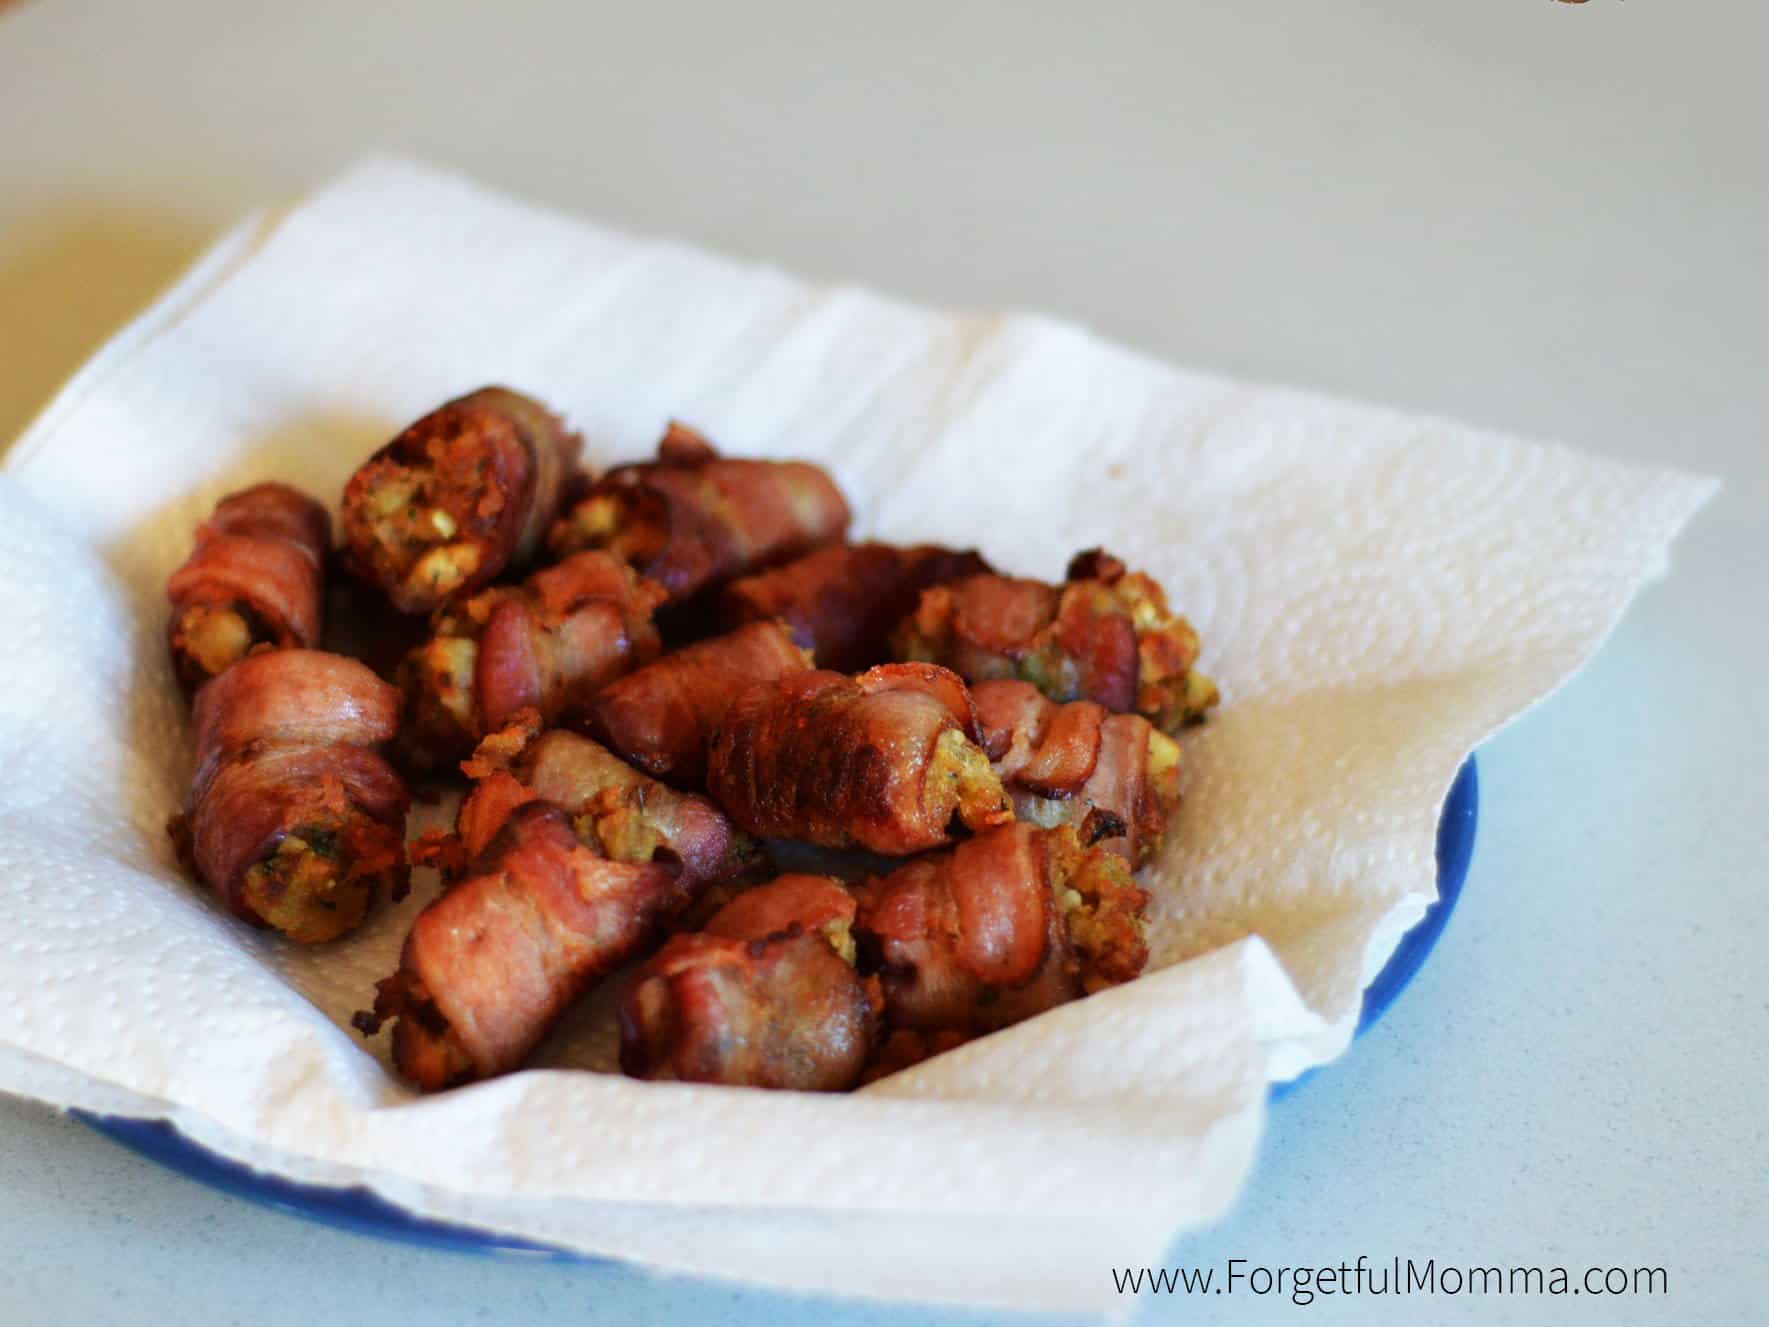 bacon wrapped stuffing